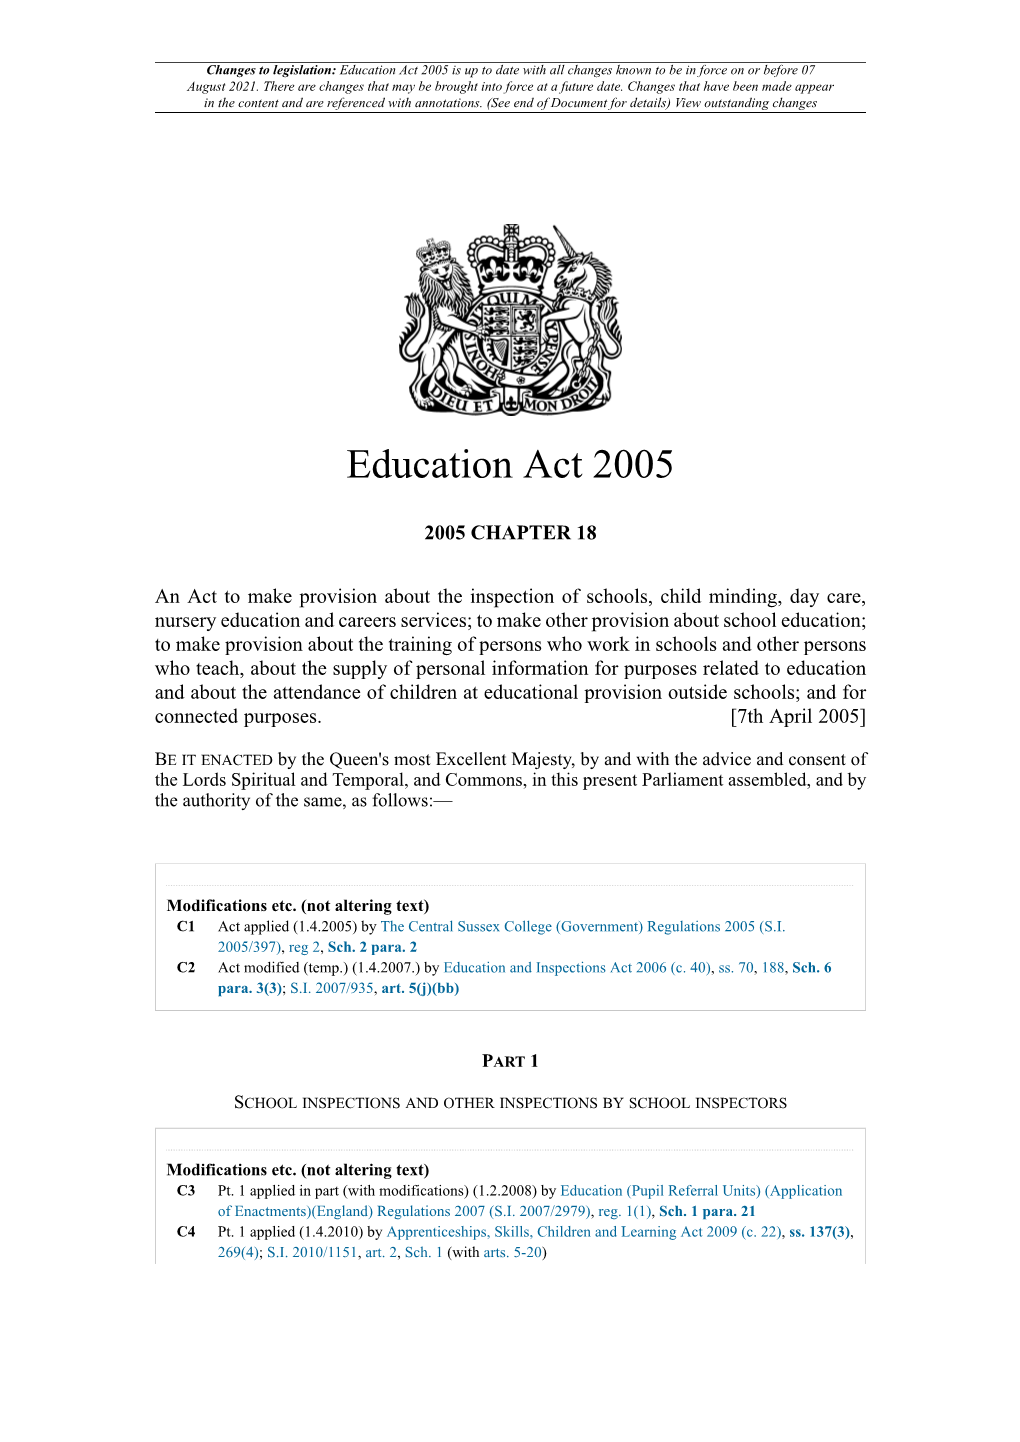 Education Act 2005 Is up to Date with All Changes Known to Be in Force on Or Before 07 August 2021